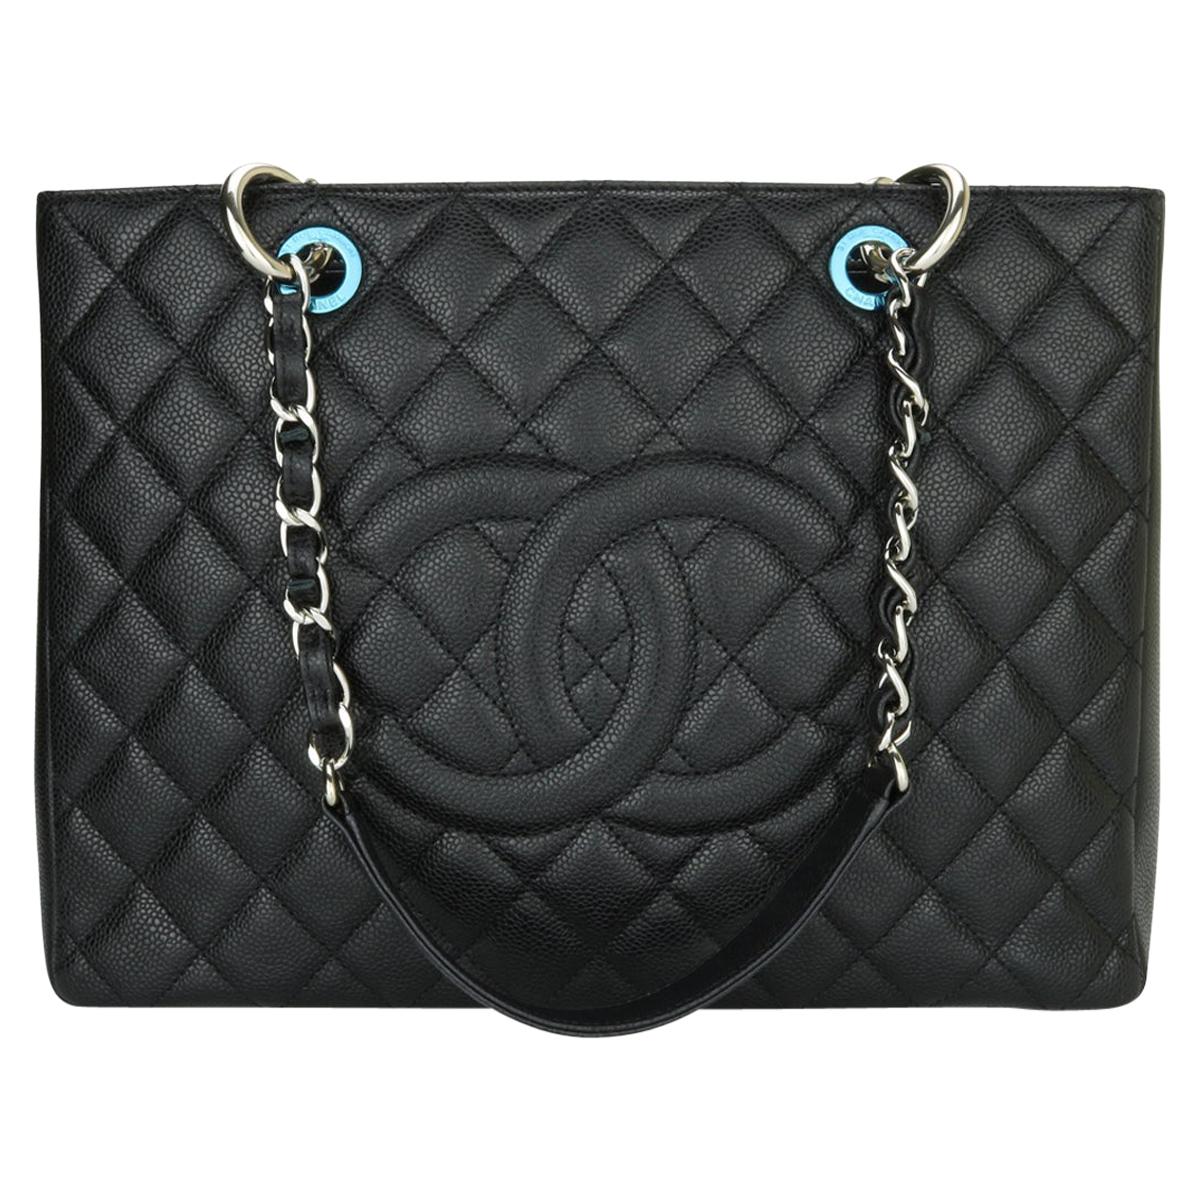 Chanel Black Quilted Caviar Leather Grand GST Shopper Tote Bag – STYLISHTOP